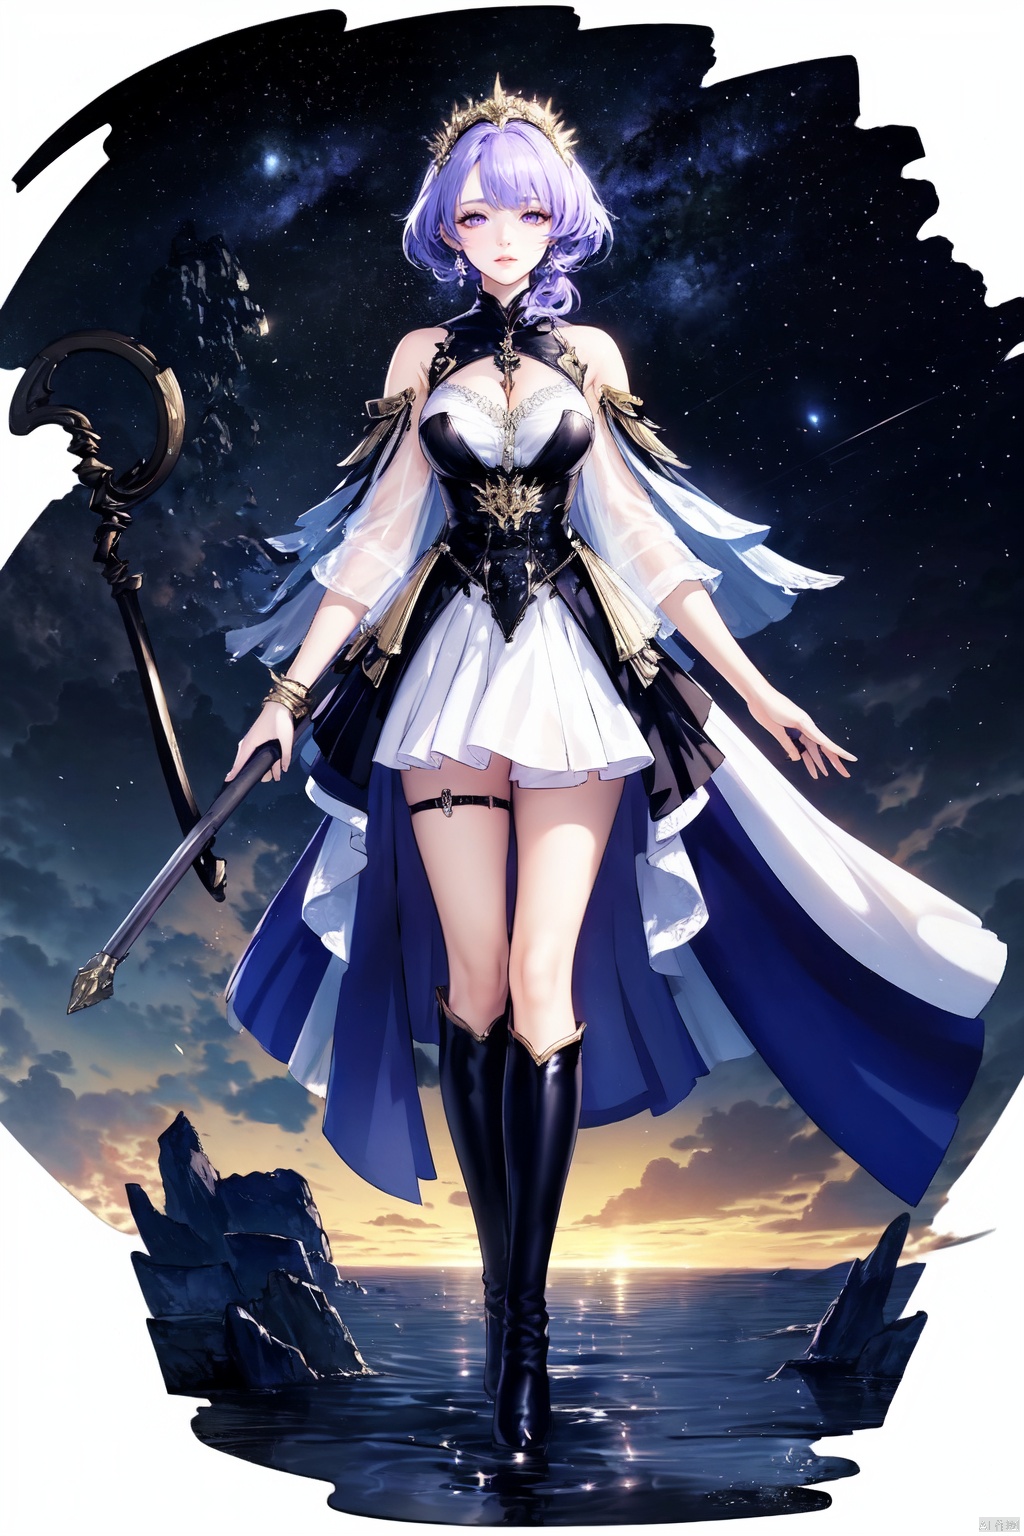 (gacha masterpiece), ((celestial being)), (ultra-highres), anime-infused illustration, original character design, elaborate detailing . ooo, 1character, solo, full body, posed against a backdrop of floating celestial islands amidst starry skies akin to Genshin Impact's Sumeru region, featuring an enigmatic female figure with cascading lilac-purple hair styled in an elaborate updo adorned with moonstone ornaments, her captivating amethyst eyes shimmering with cosmic wisdom, garbed in a flowing, multi-layered robe of celestial blue and midnight black, intricately patterned with constellations and astral motifs, the hem embroidered with silvery filigree that seemingly glows softly, wearing fingerless gloves and thigh-high boots of supple white leather, clasped at the knees with gold crescent moon buckles, wielding an otherworldly staff crowned by a radiant crystal orb that channels both light and darkness, standing on a translucent platform suspended above ethereal clouds, surrounded by wisps of divine energy and trailing stardust, poised for a transcendent journey through realms of celestial harmony and conflict., ((poakl)), azur lane